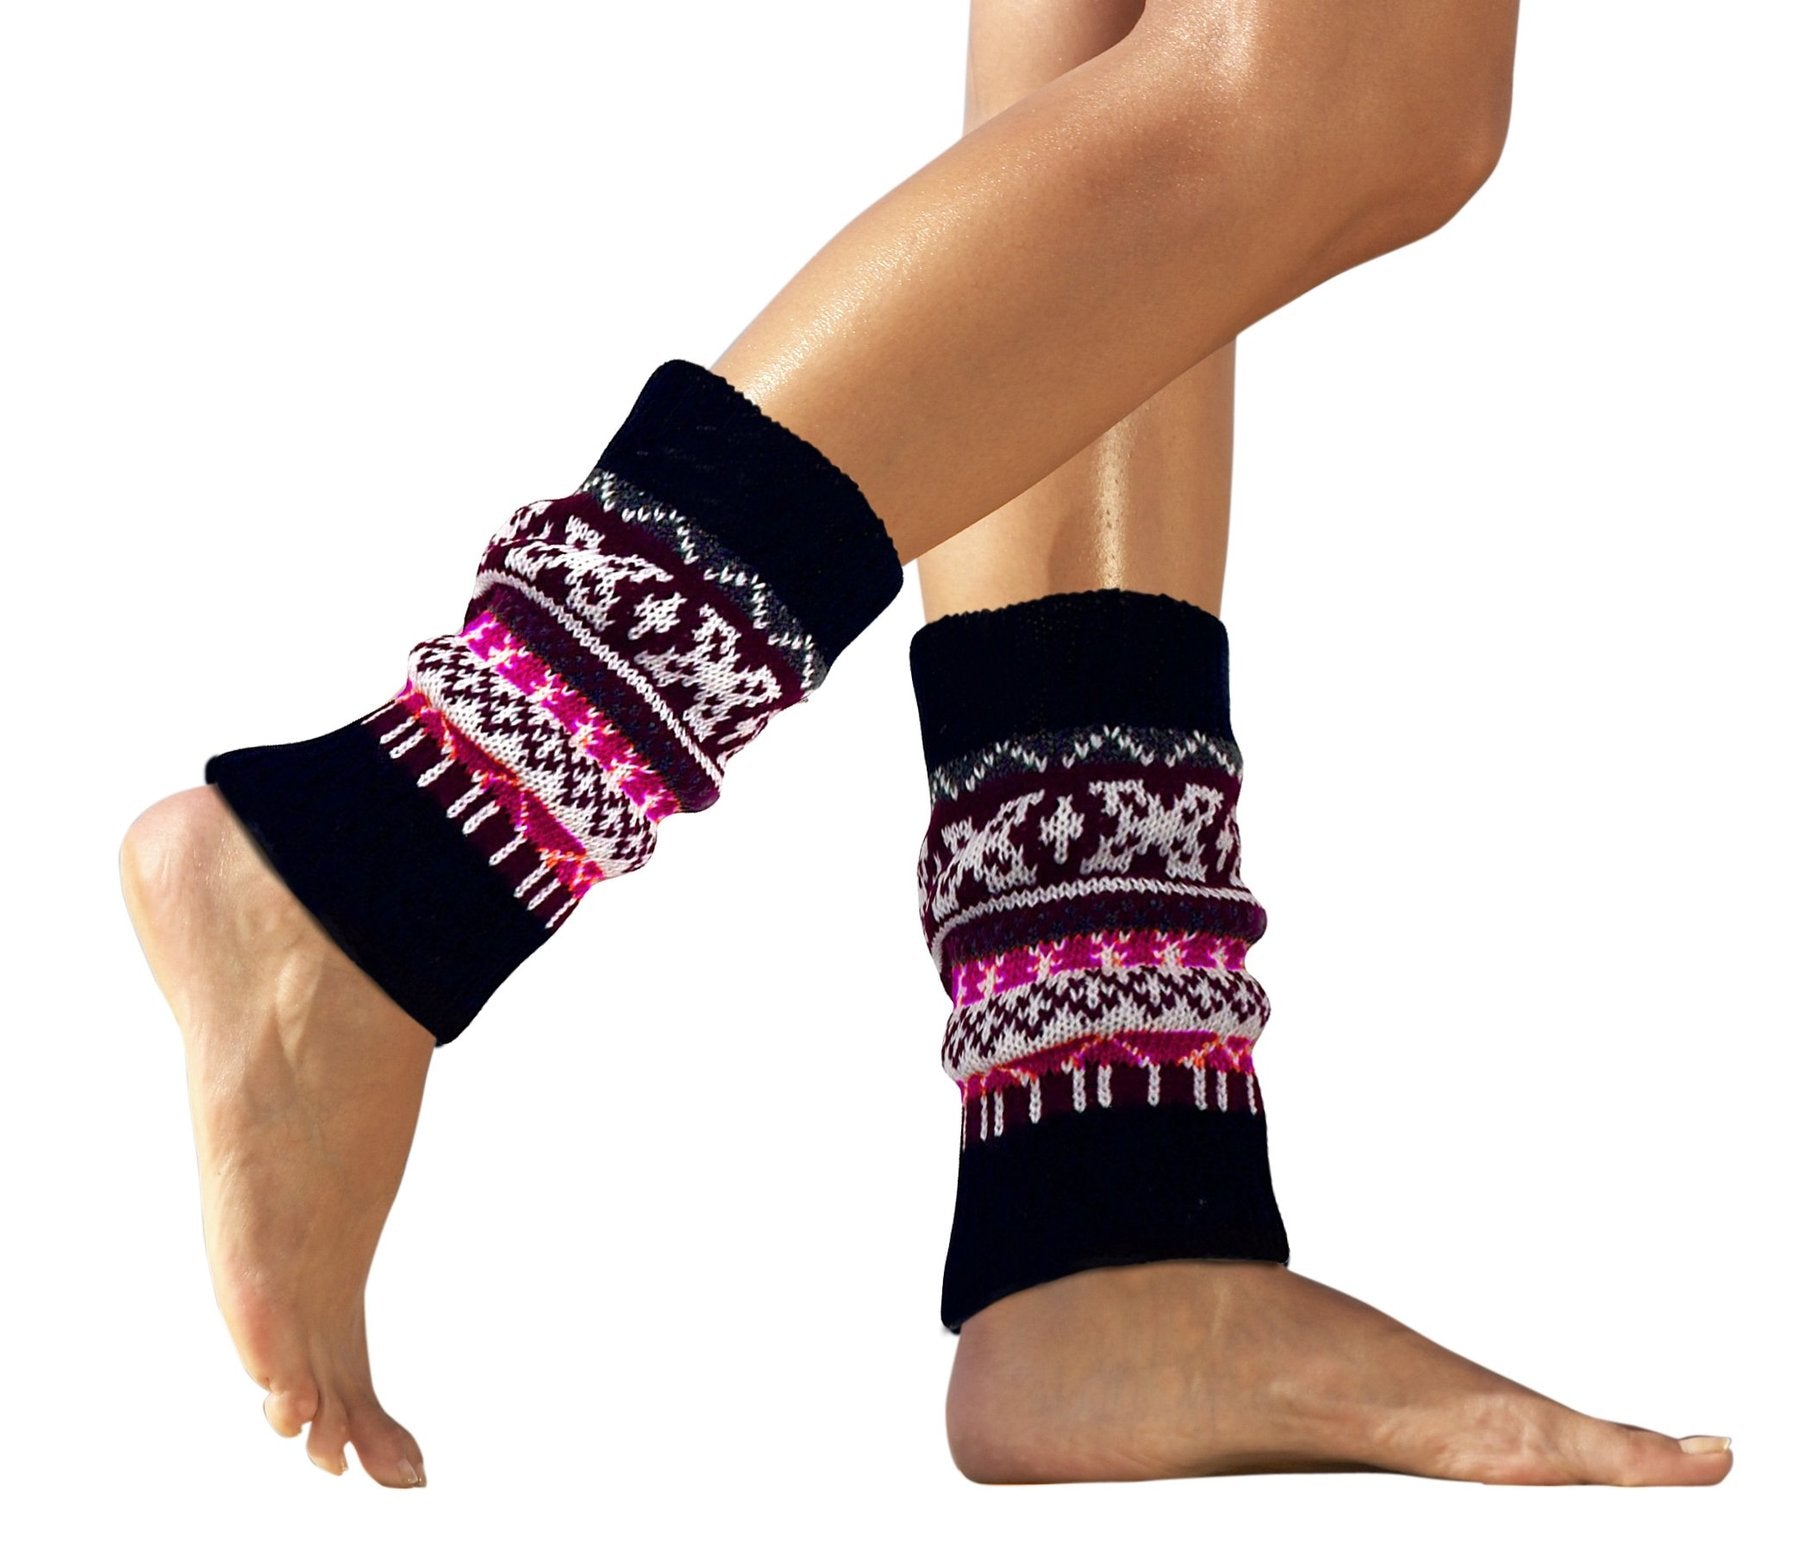 Cozy Soft Adjustable Knitted Winter Leg Warmers with Cute Buttons